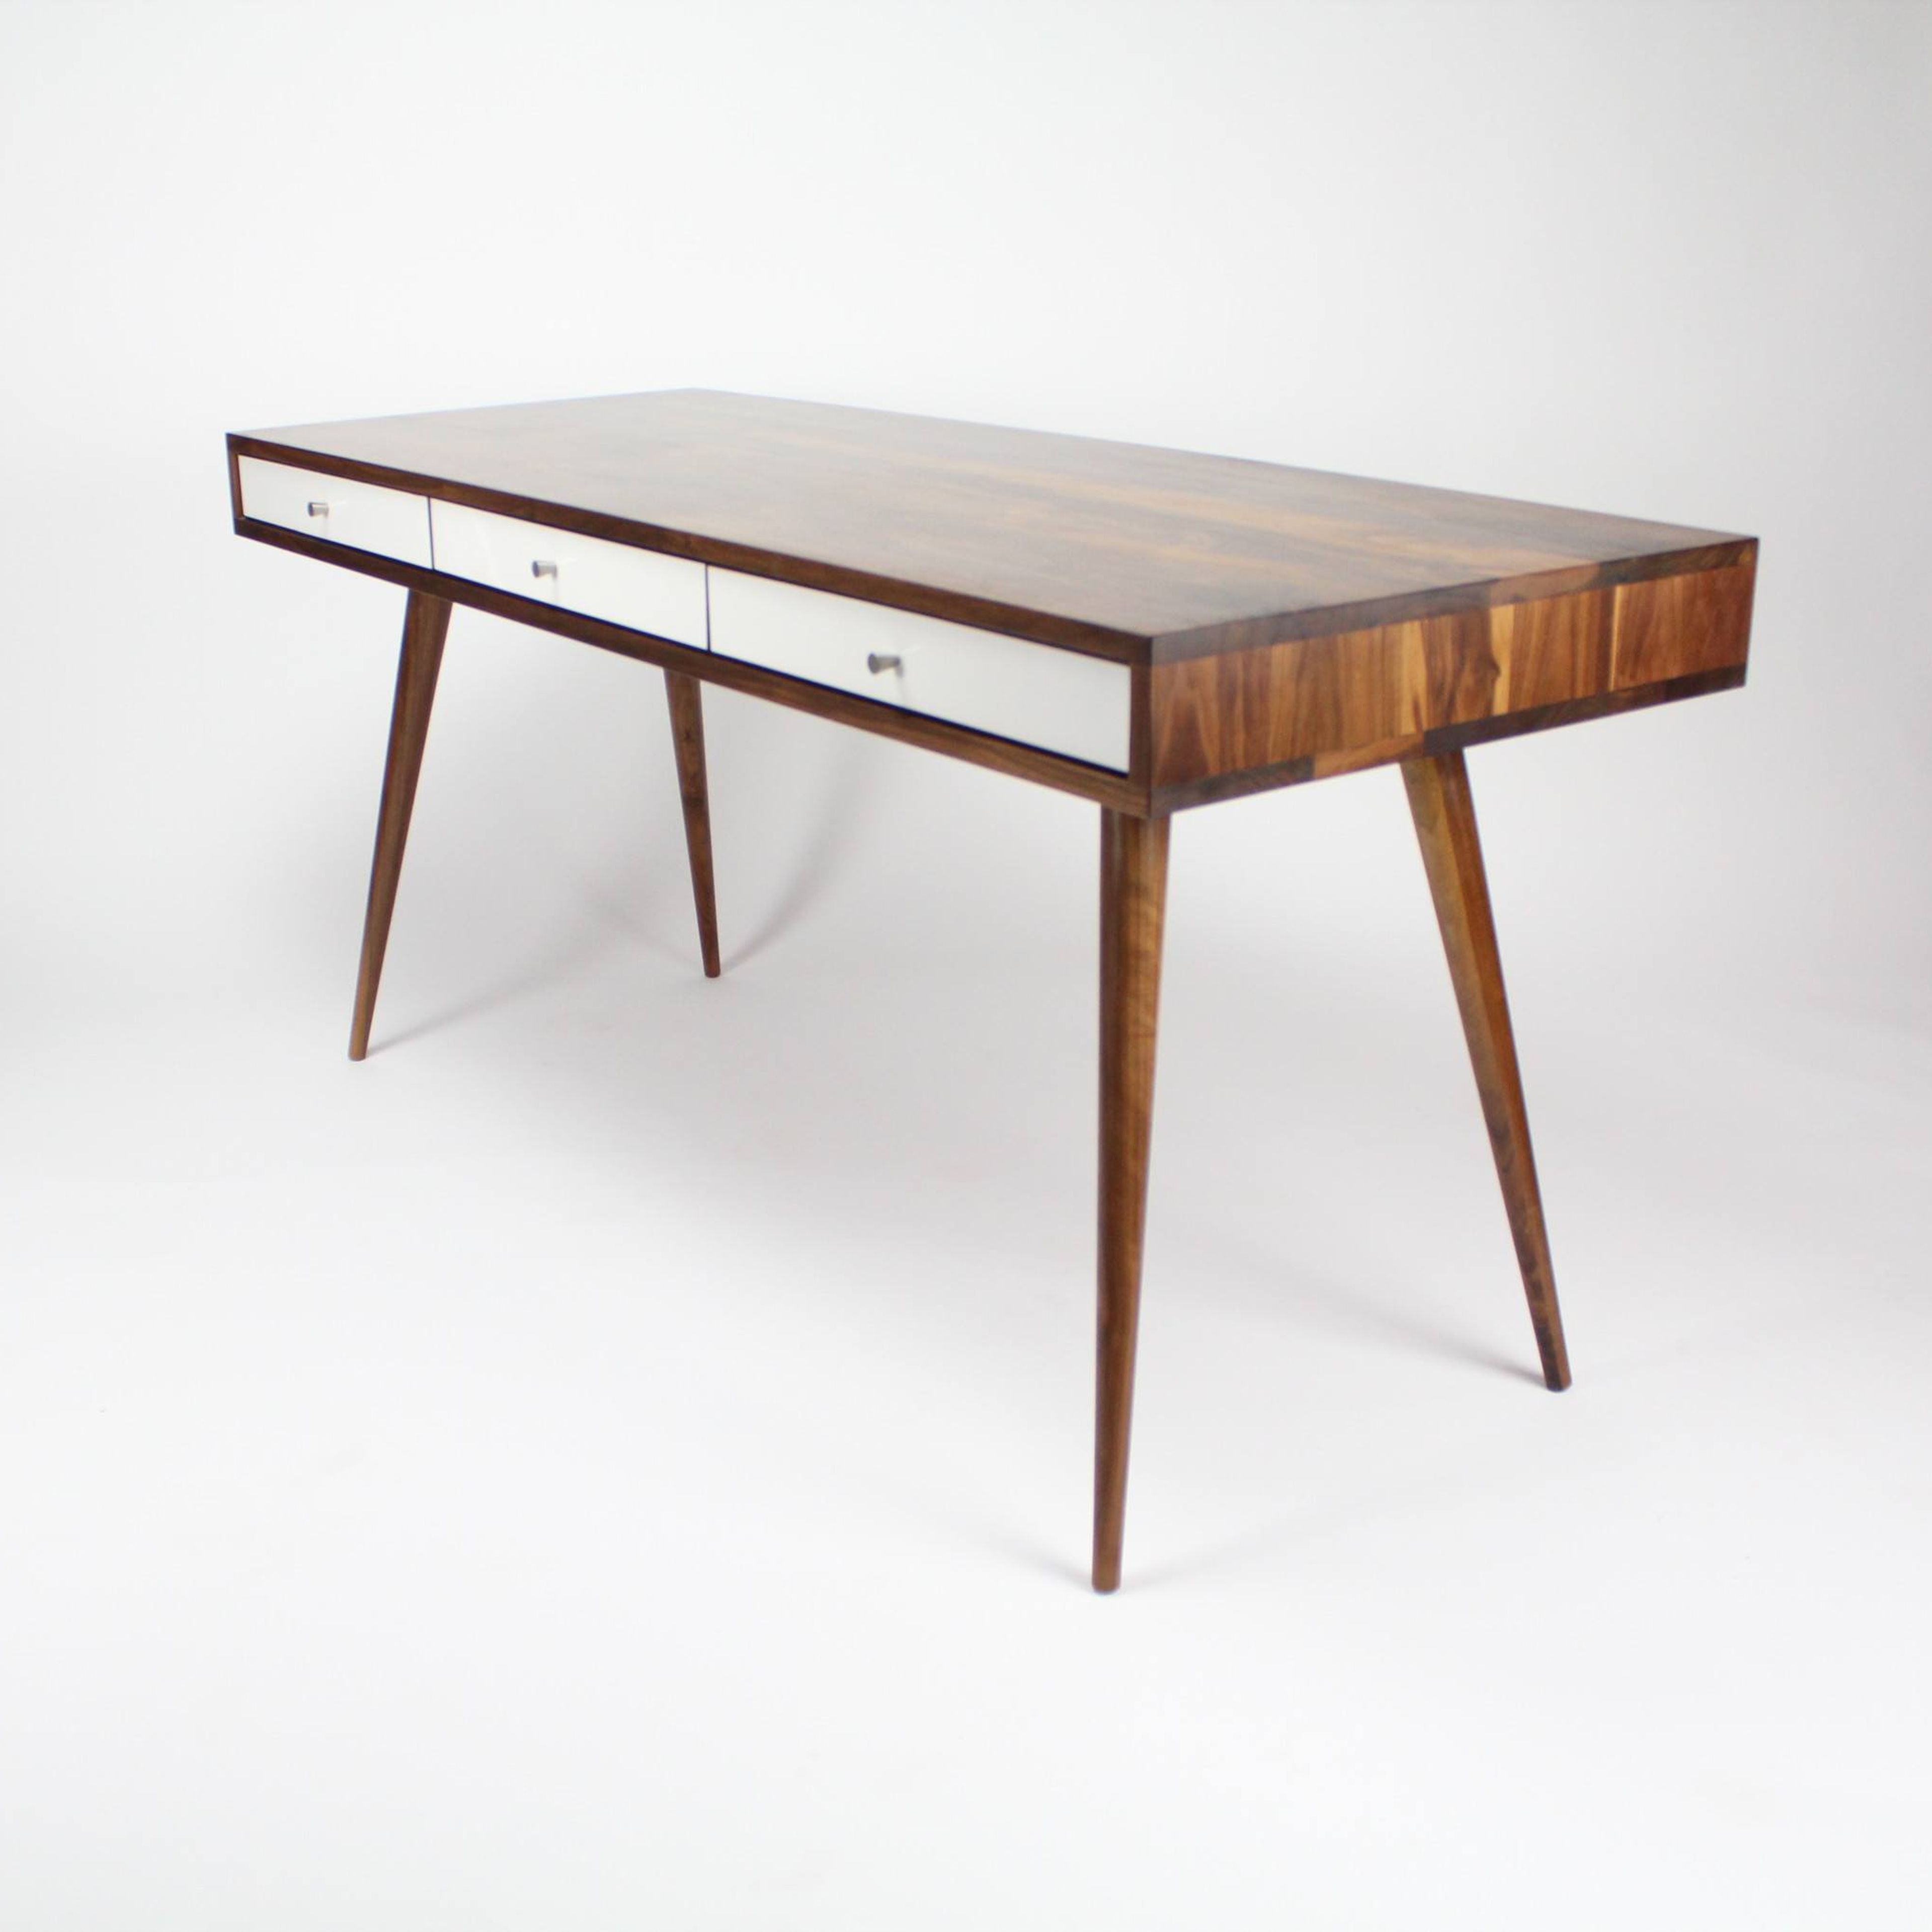 Walnut Mid Century Desk with Cord Management Available now!